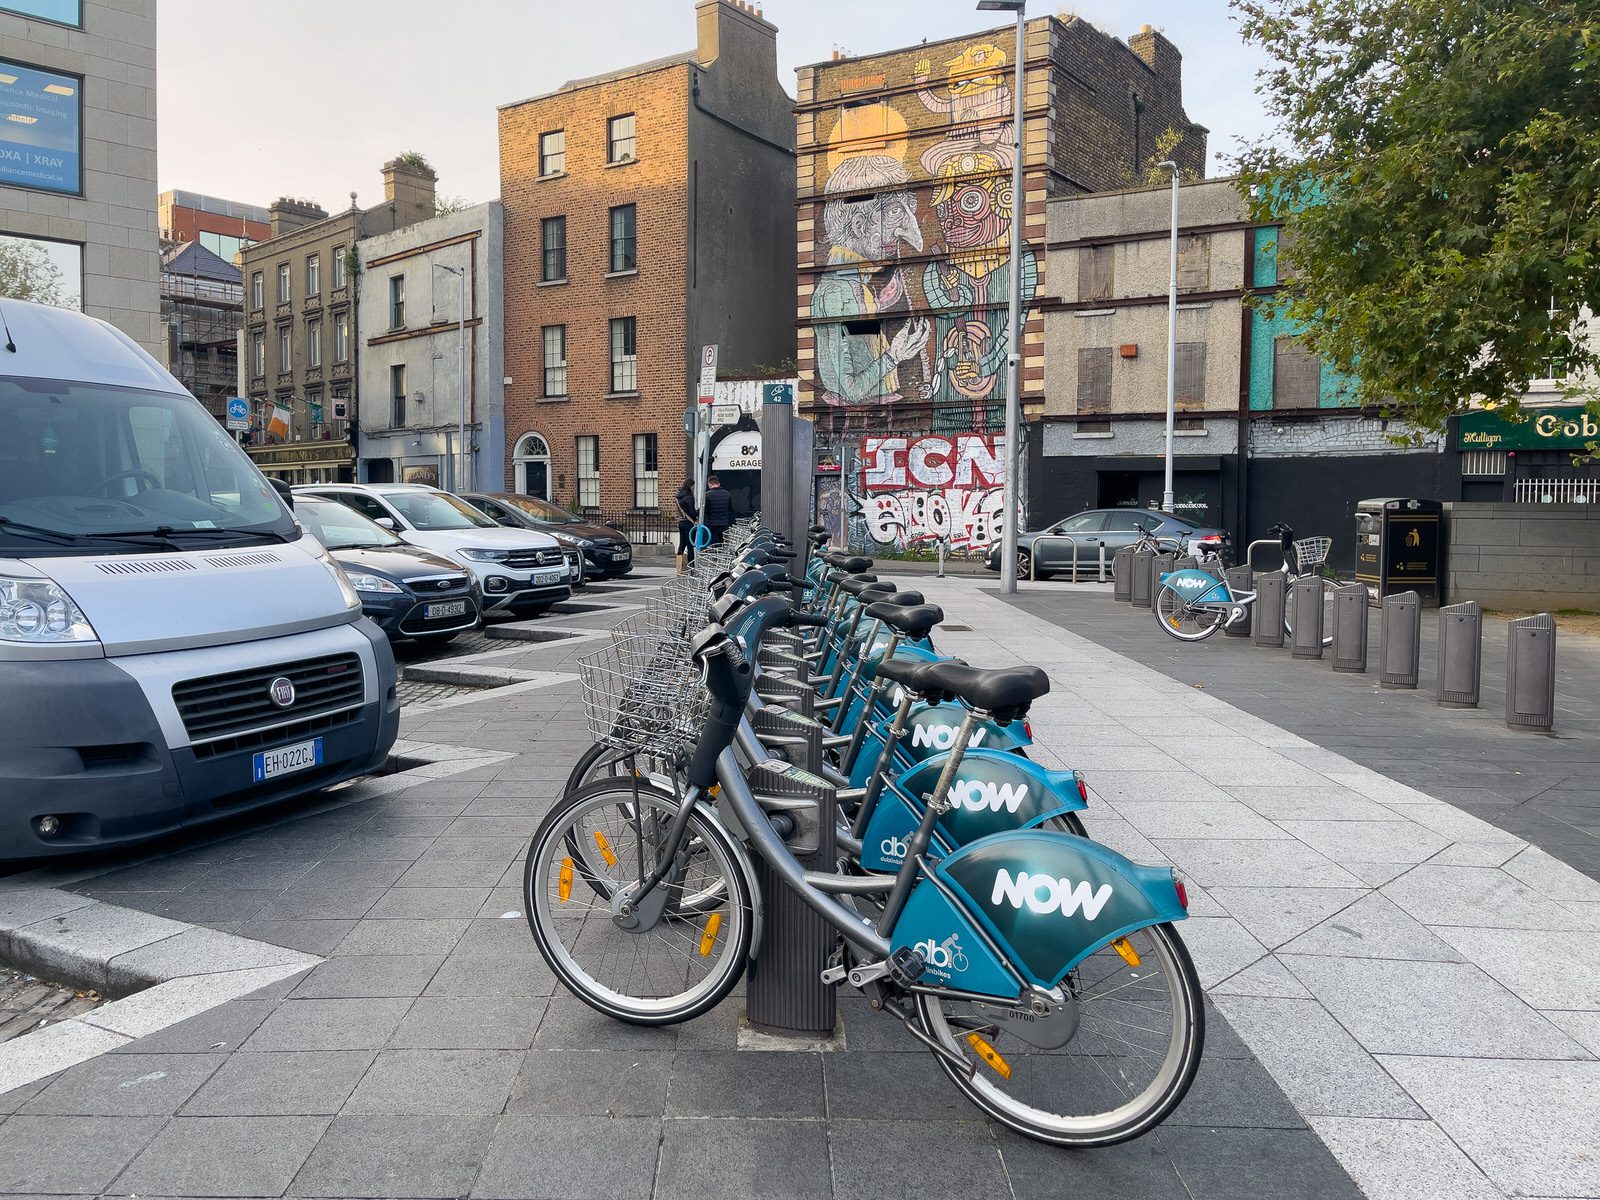 DUBLINBIKES DOCKING STATION 42 [SMITHFIELD PLAZA OR SQUARE - CHOOSE WHICH YOU PREFER] 004